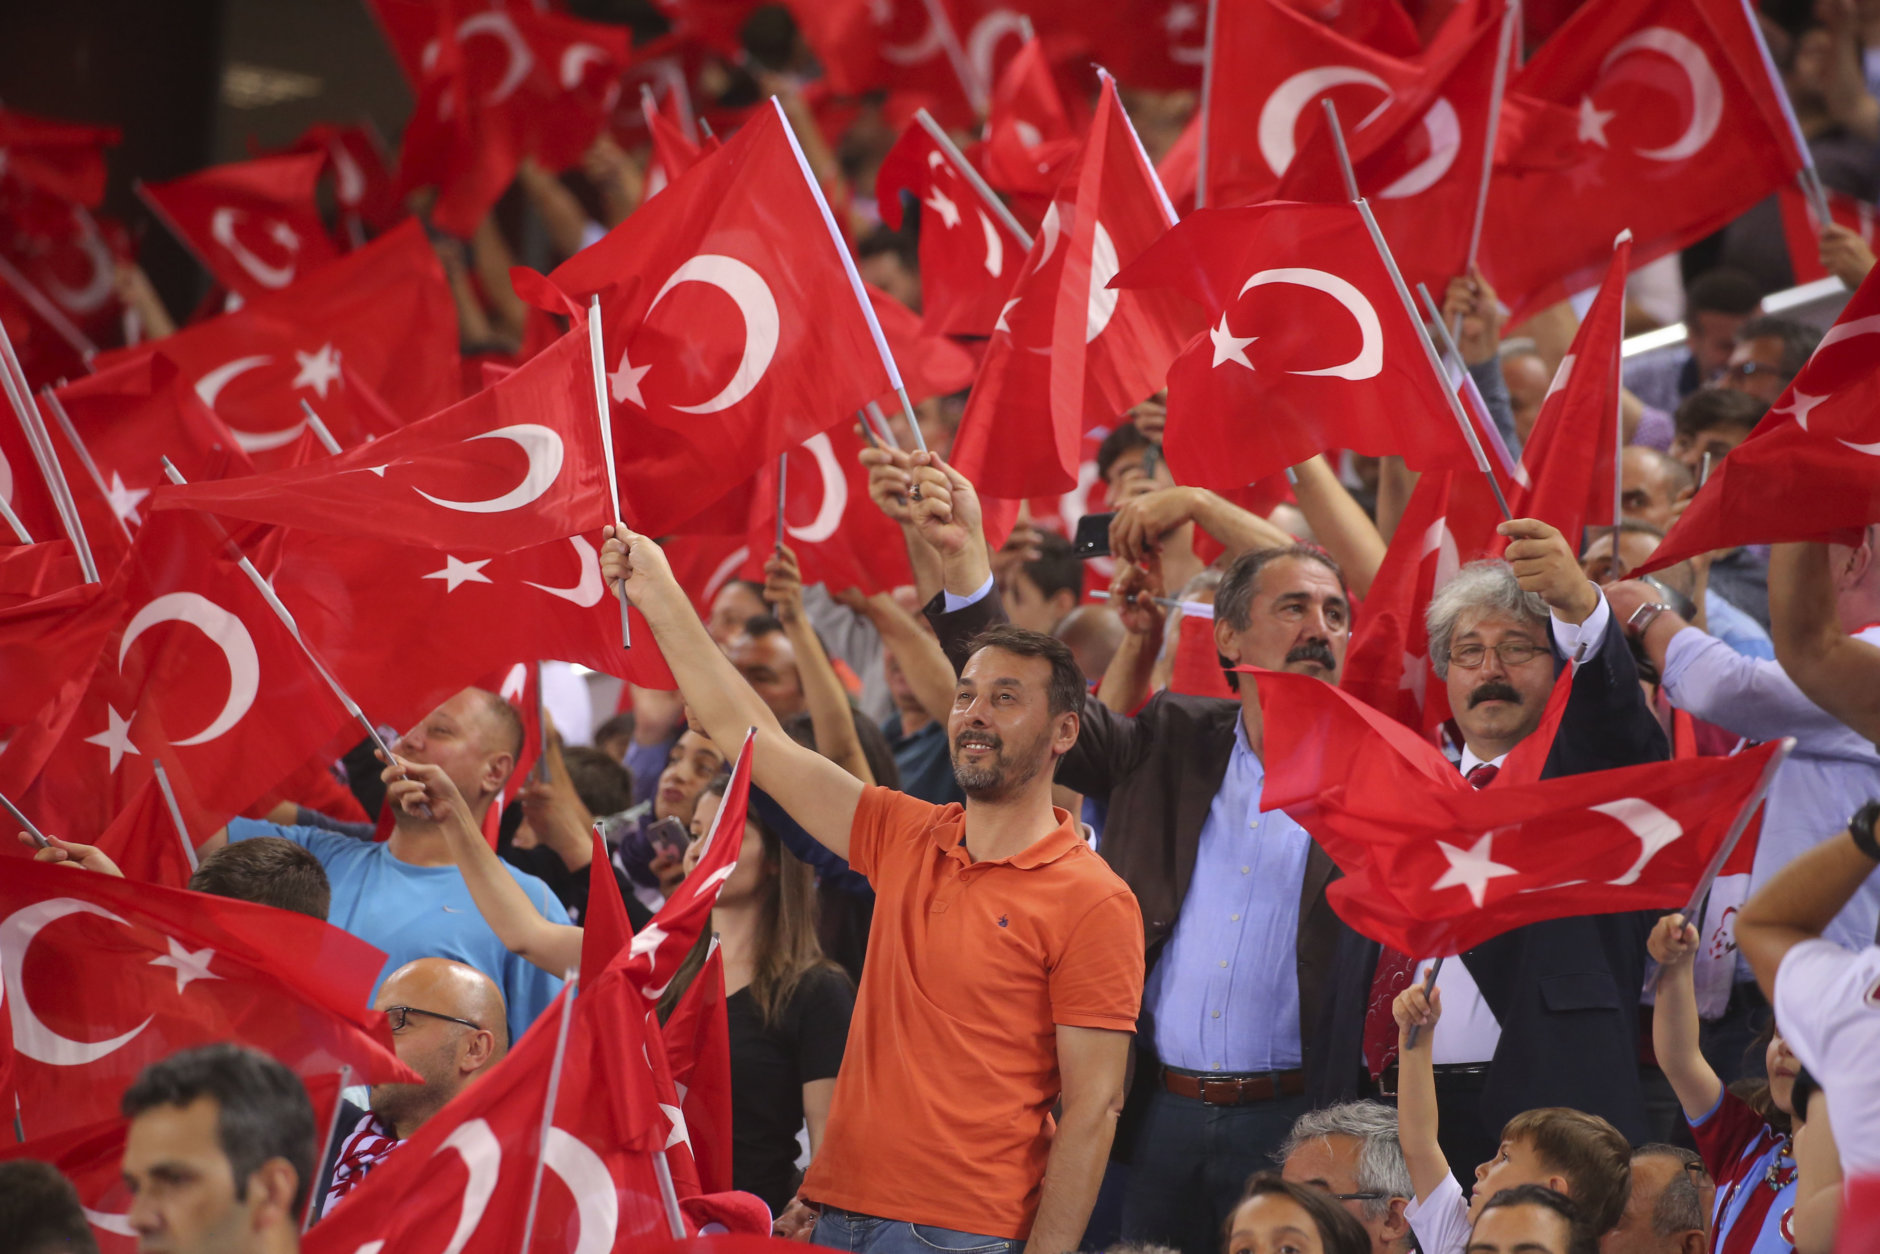 Turkey's fans wave national flags prior to the UEFA Nations League soccer match between Turkey and Russia in Trabzon, Turkey, Friday, Sept. 7, 2018. (AP Photo)